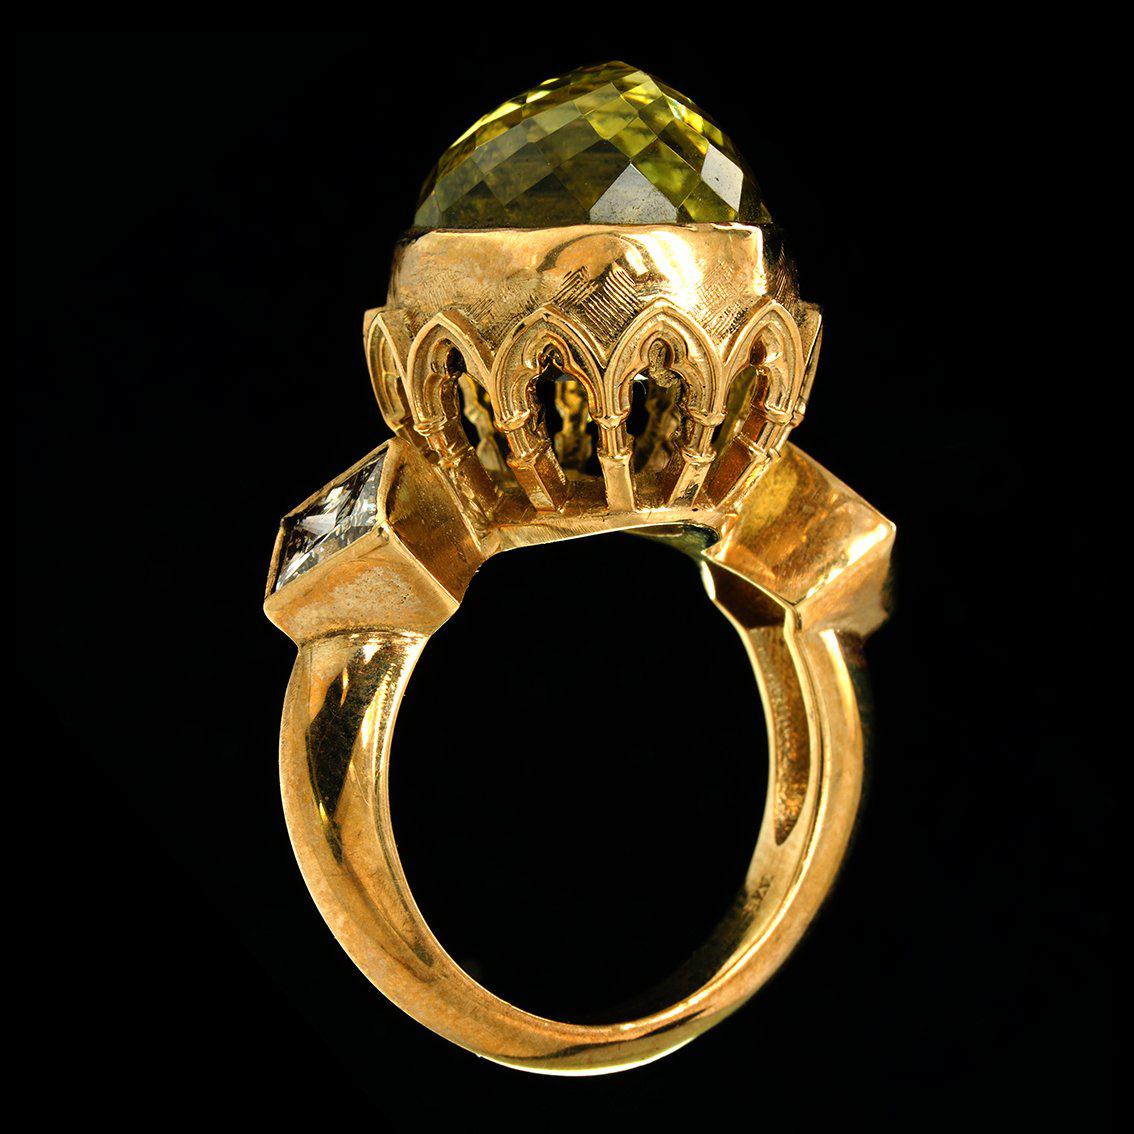 A luxurious dream, this exquisite ring’s namesake Chloris was a Greek nymph who dwelt in the Elysian Fields. Associated with new growth, spring, and flowers, her name is derived from chlōrós meaning “greenish yellow”.

Handcrafted in 9kt yellow gold